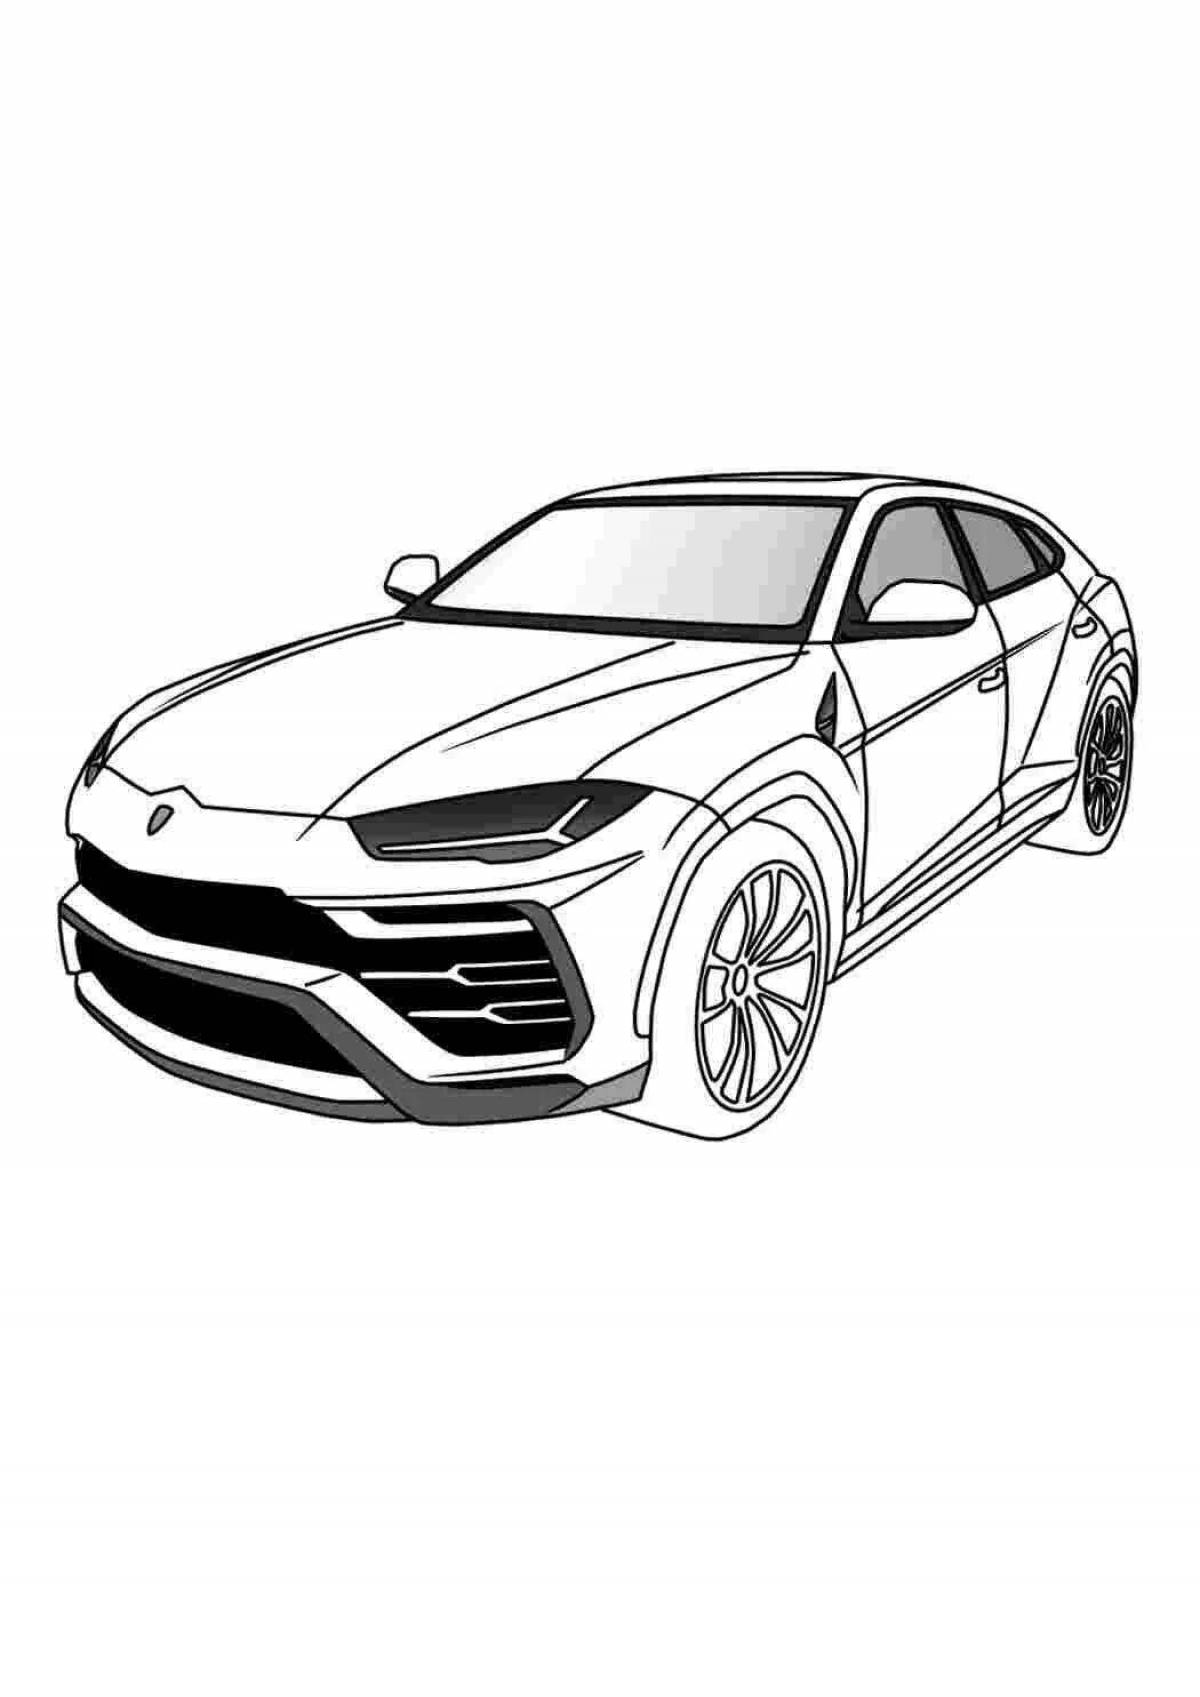 Coloring page gorgeous lambo